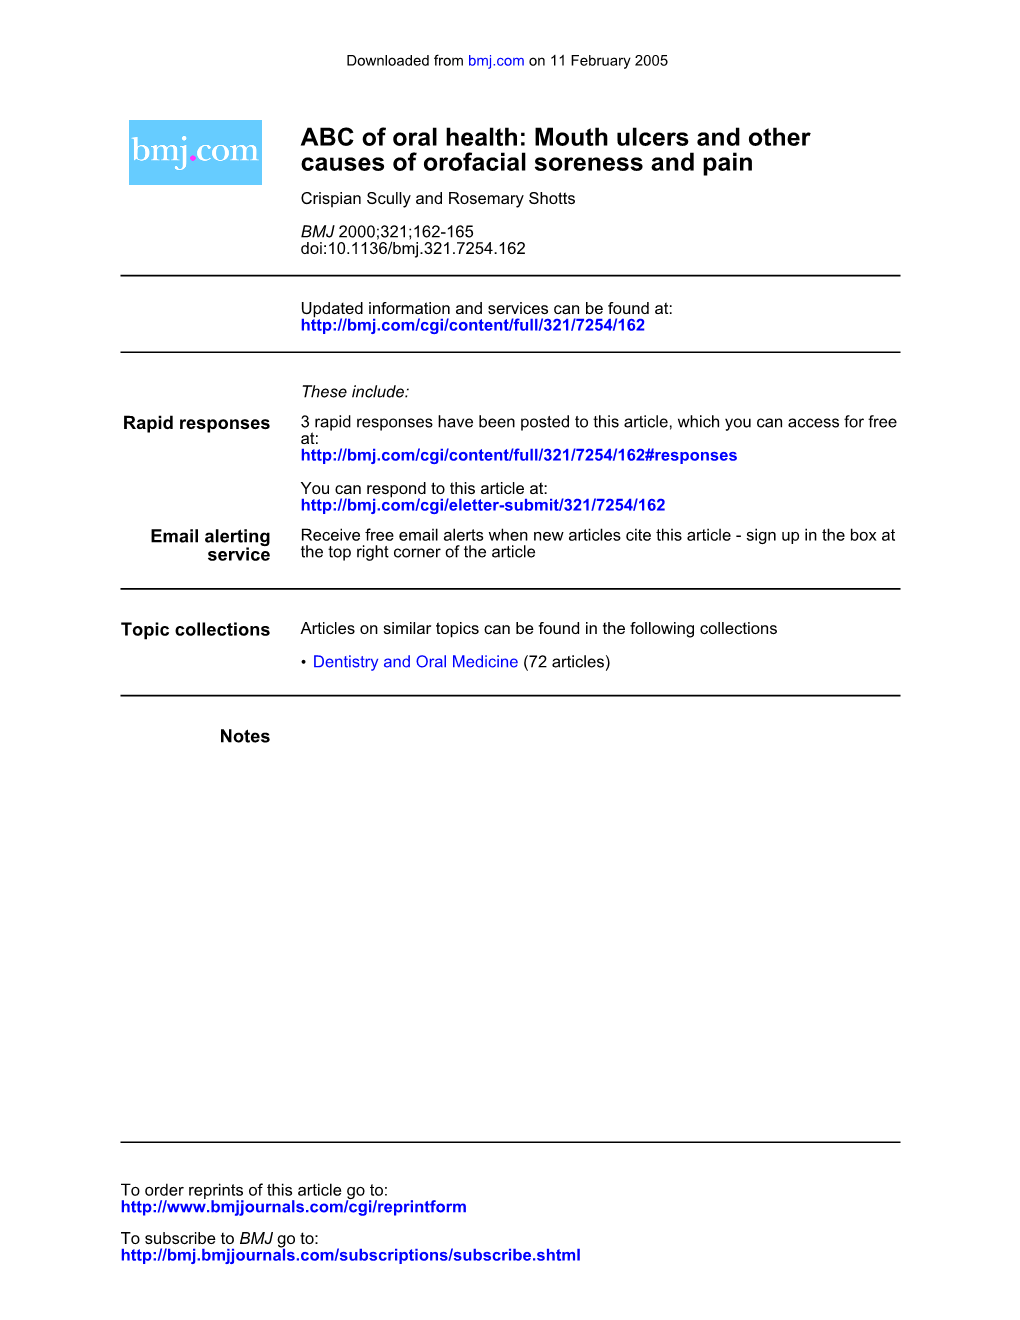 Causes of Orofacial Soreness and Pain ABC of Oral Health: Mouth Ulcers